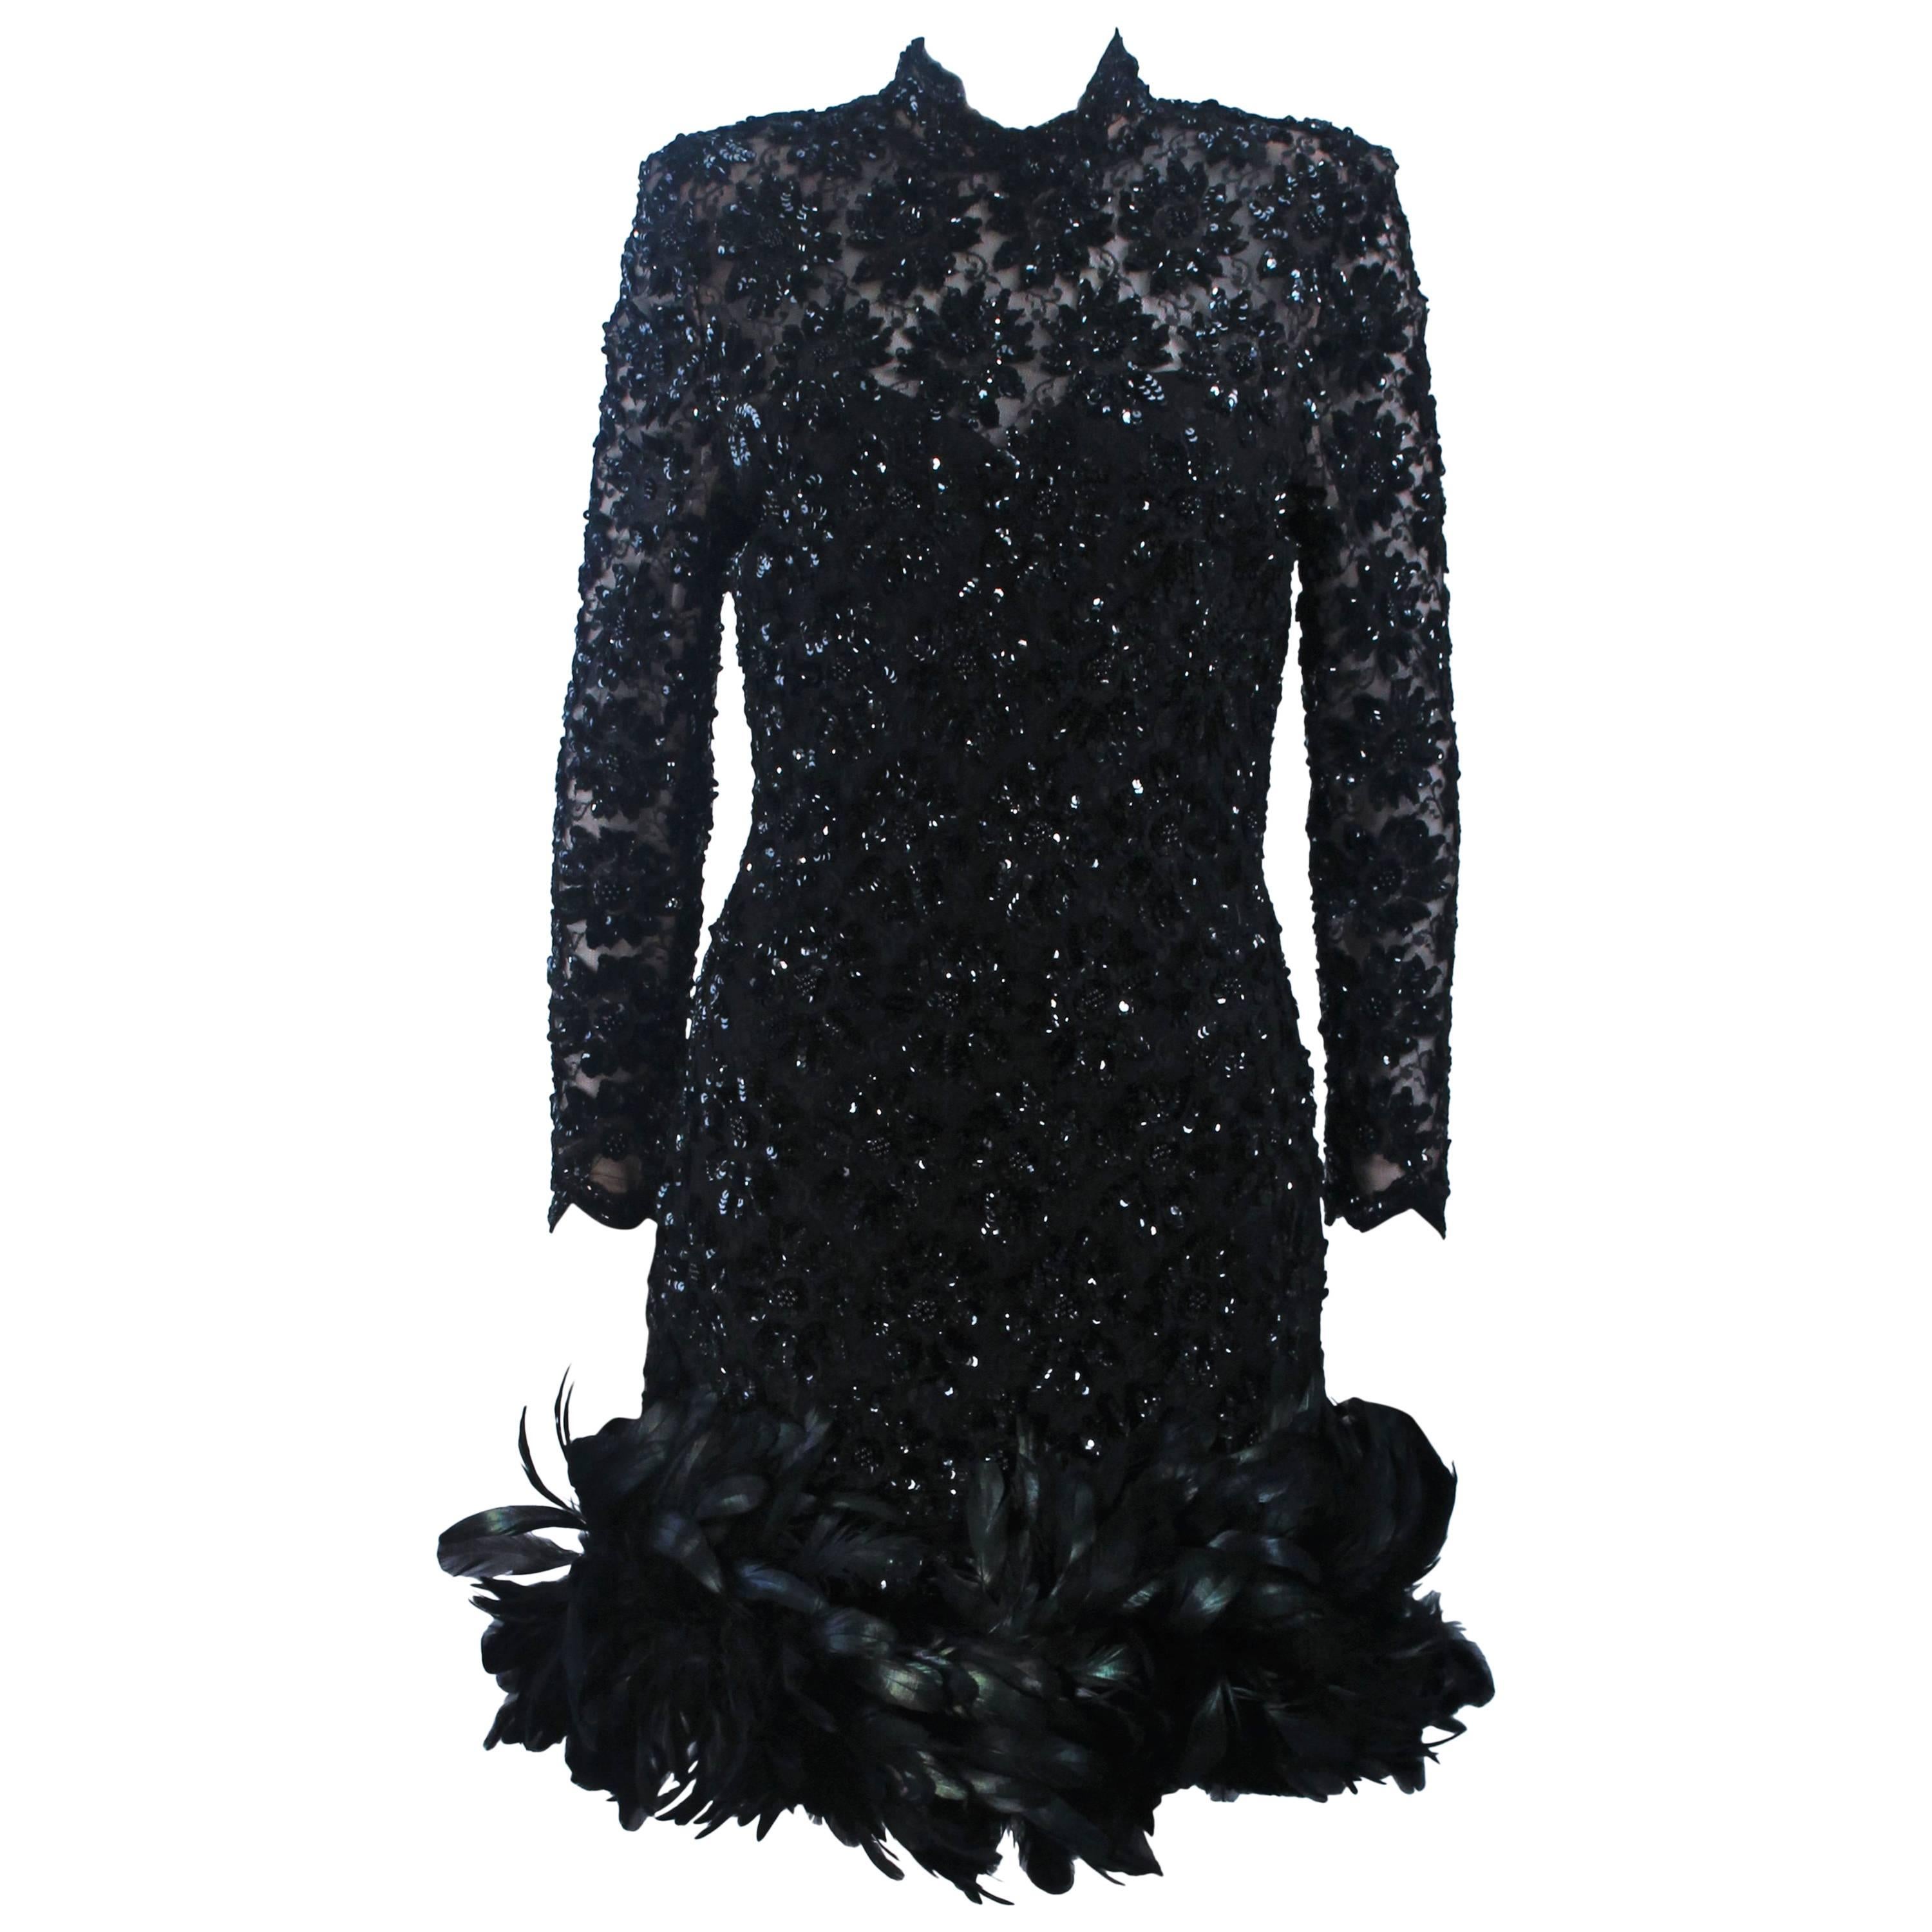 TRAVILLA Black Beaded Lace Cocktail Dress with Feather Trim Size 4-6